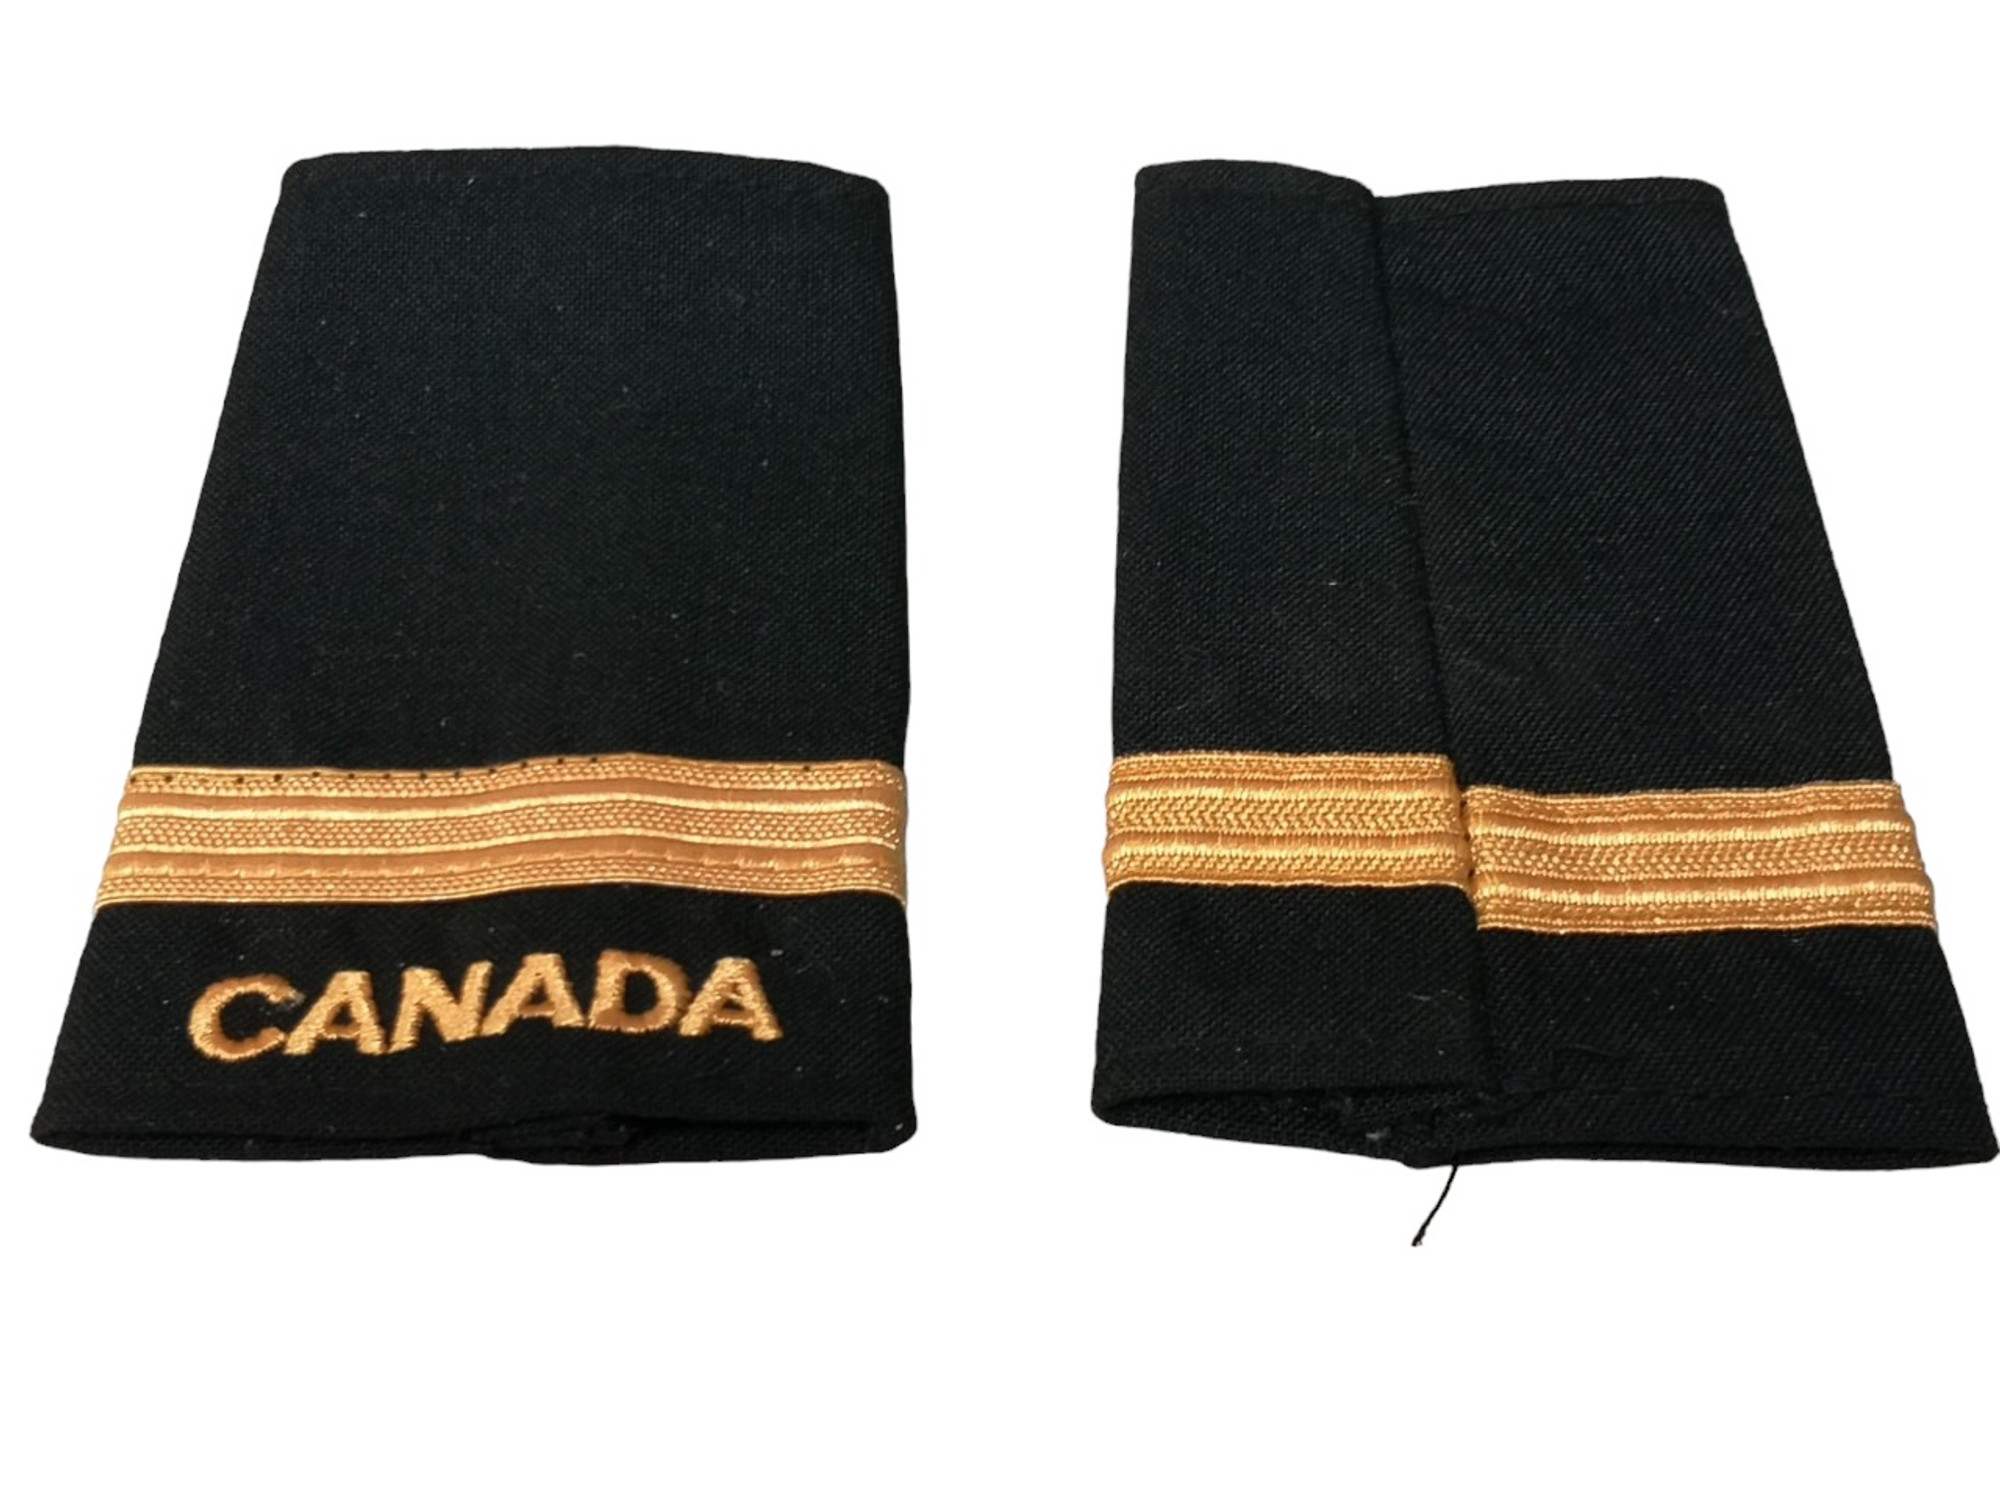 Canadian Armed Forces Rank Epaulets Navy - Acting Sub-Lieutenant